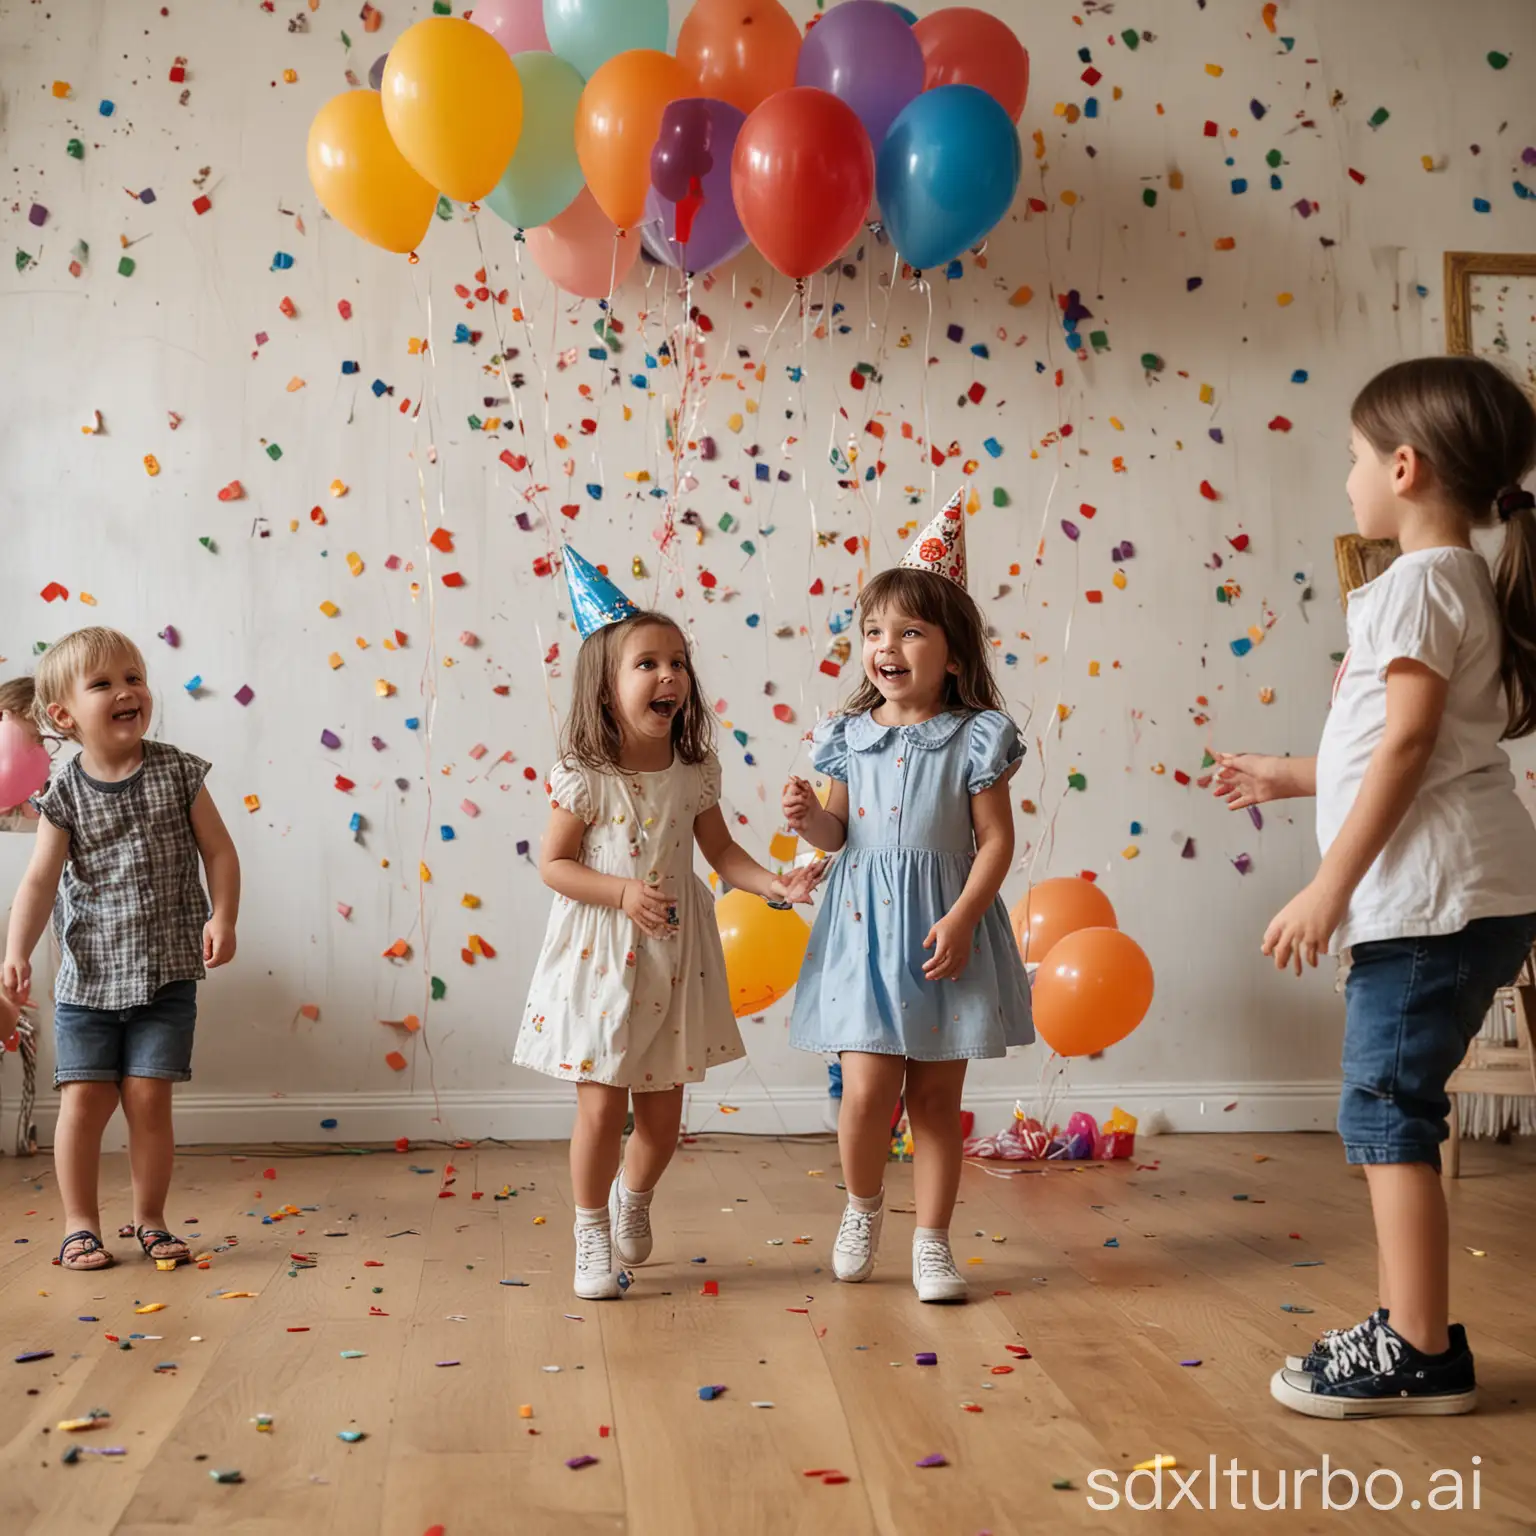 A group of children playing at a birthday party. There is a cake in the background and balloons on the walls.